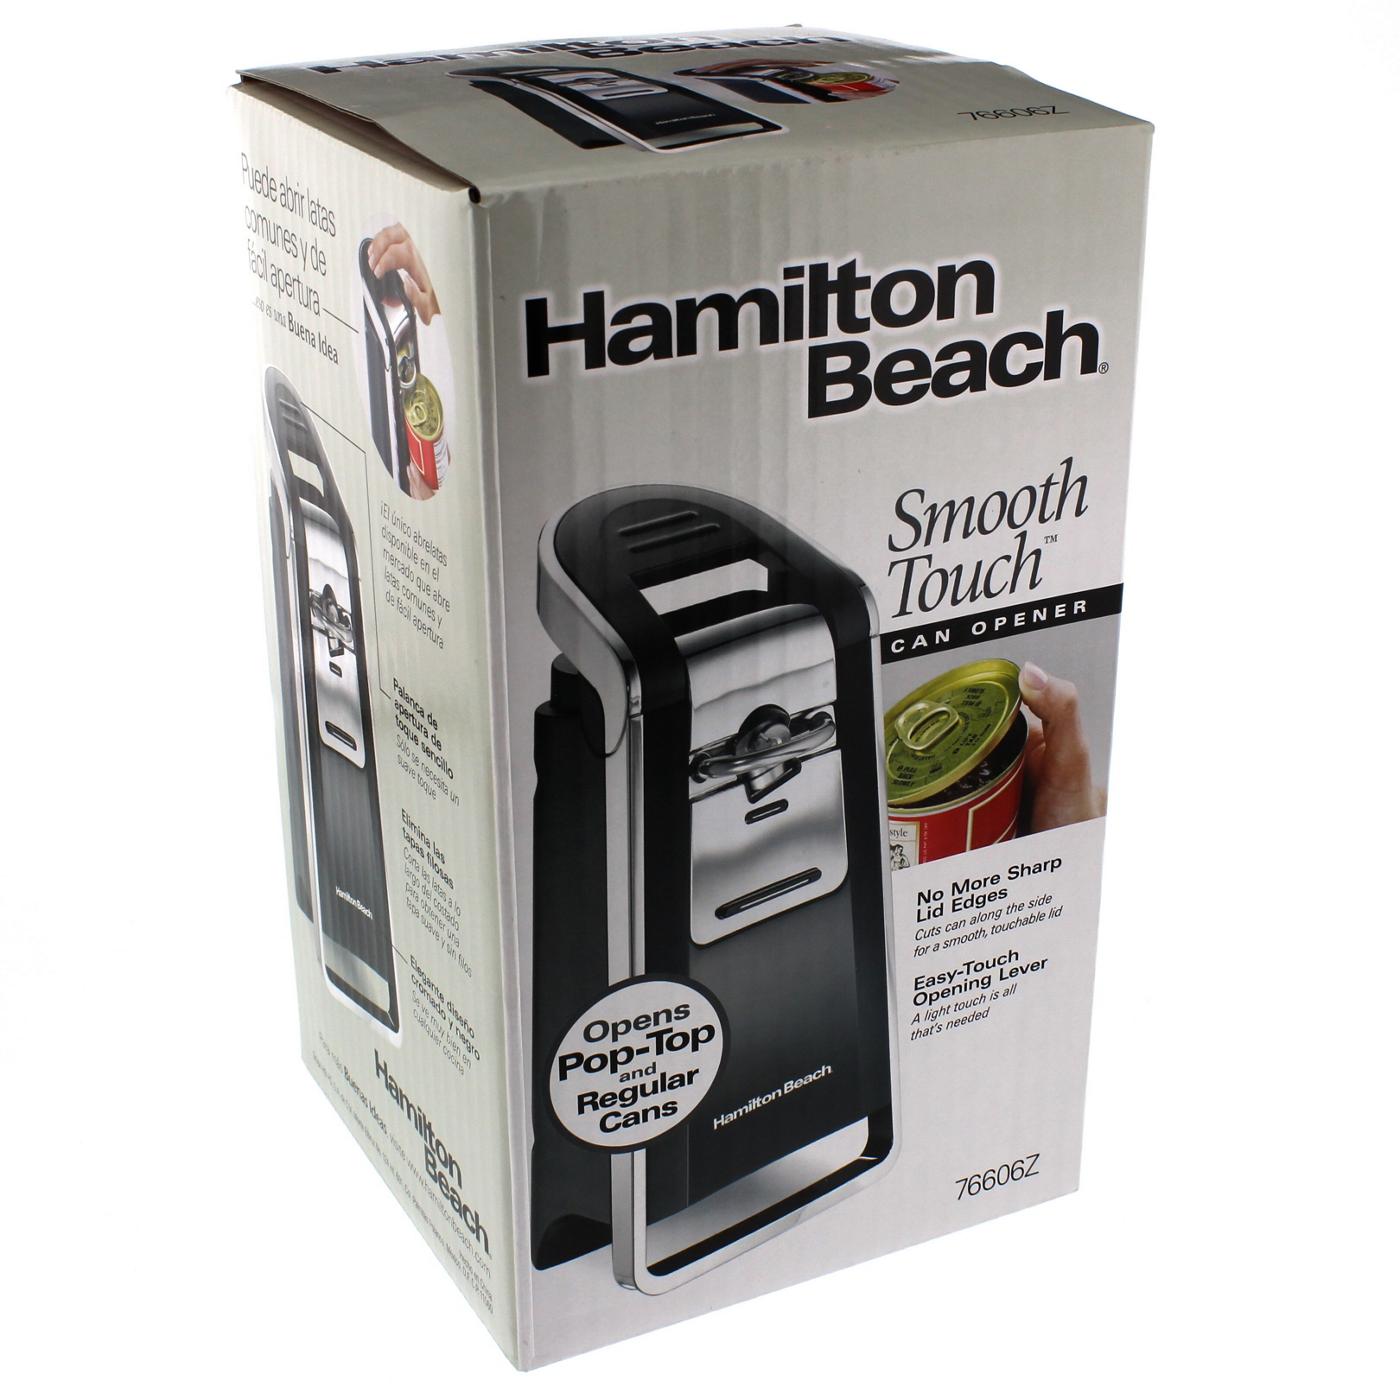 Hamilton Beach 76606Z Smooth Touch Can Opener, Black and Chrome